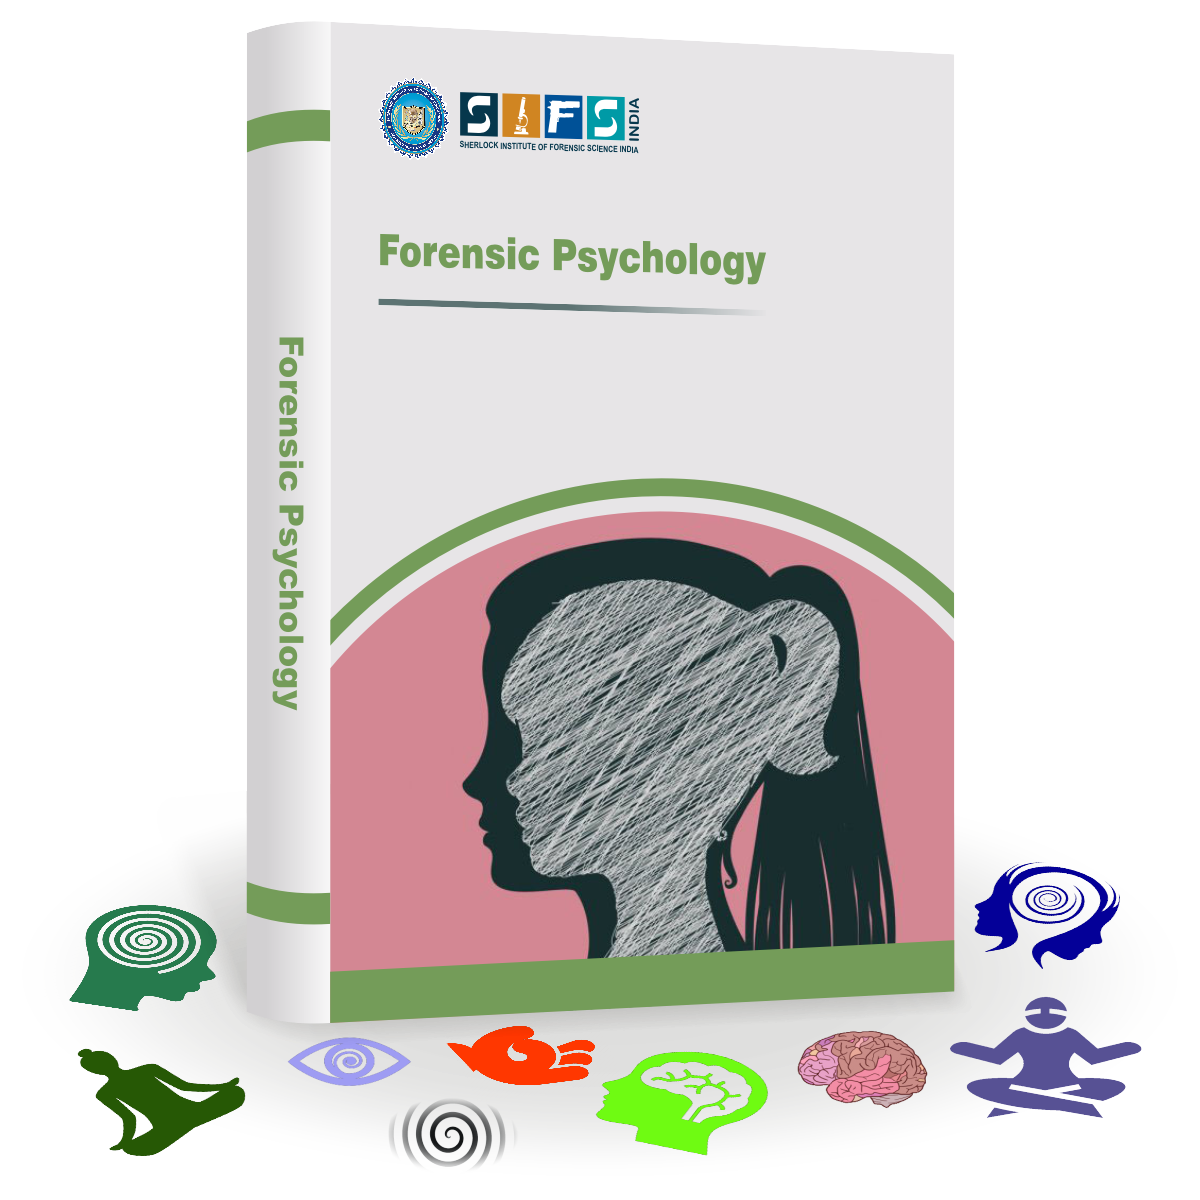 Forensic Psychology Course